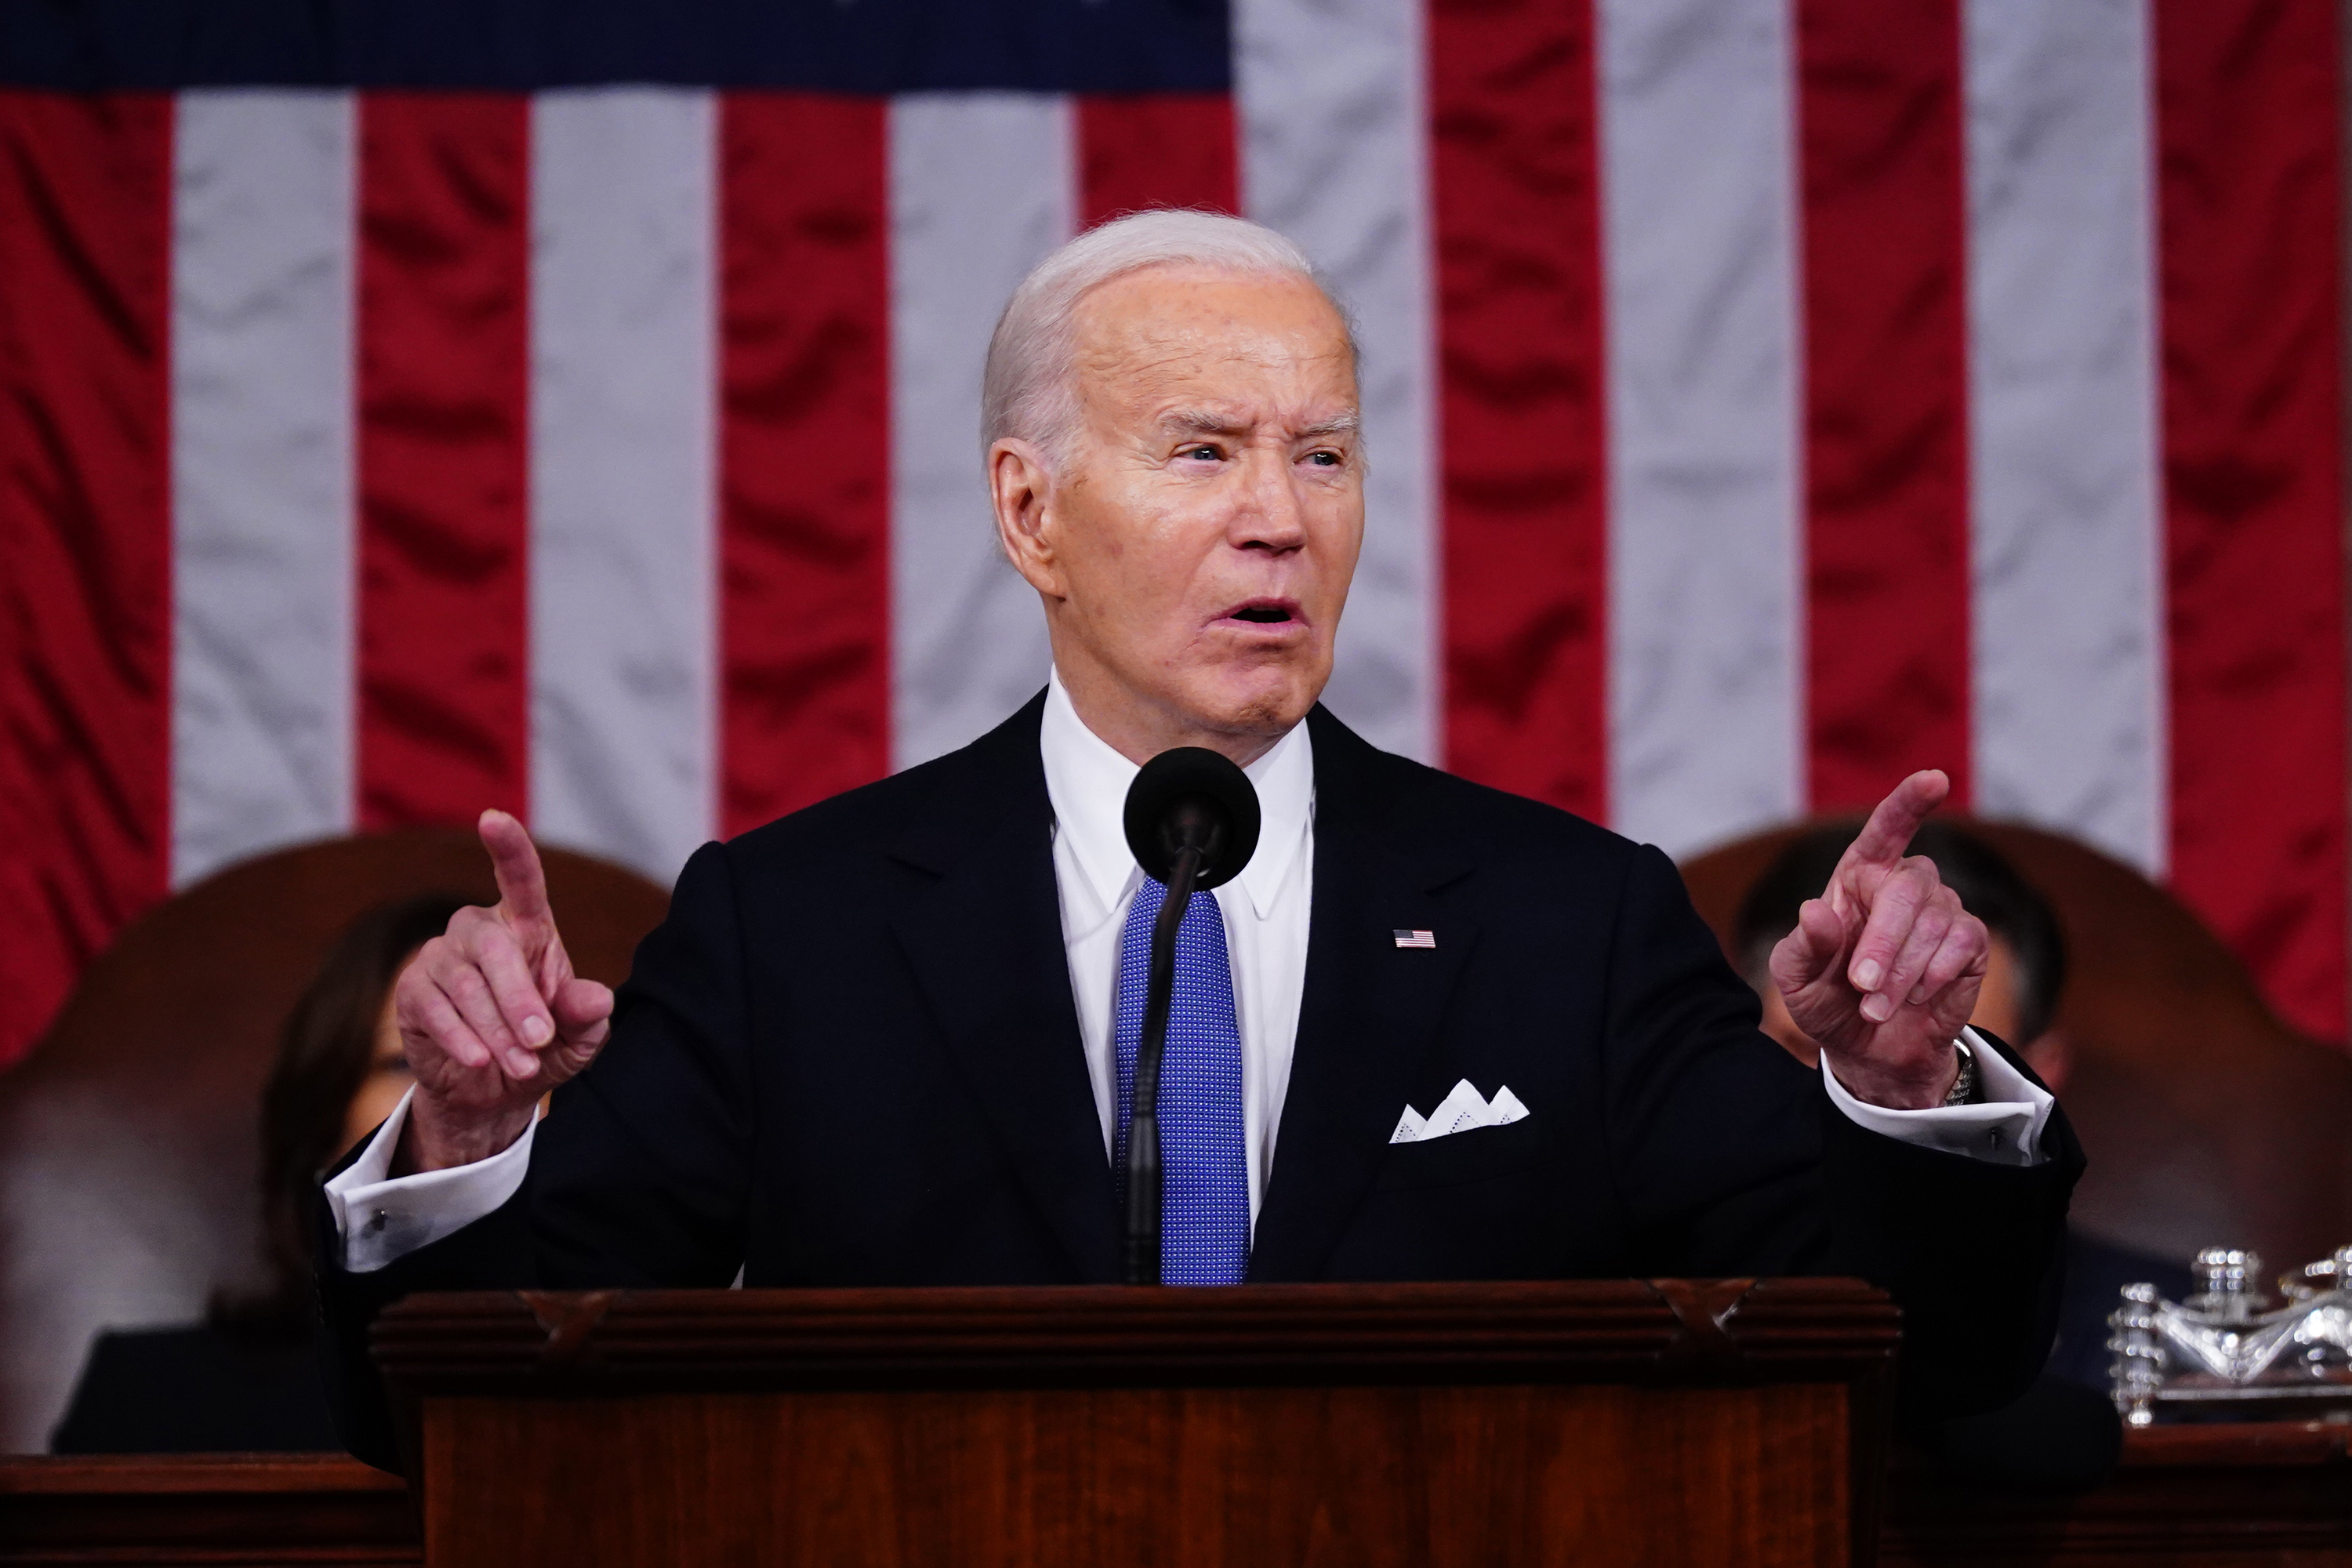 US President Joe Biden speaks during a State of the Union address at the US Capitol in Washington, DC, on March 7.